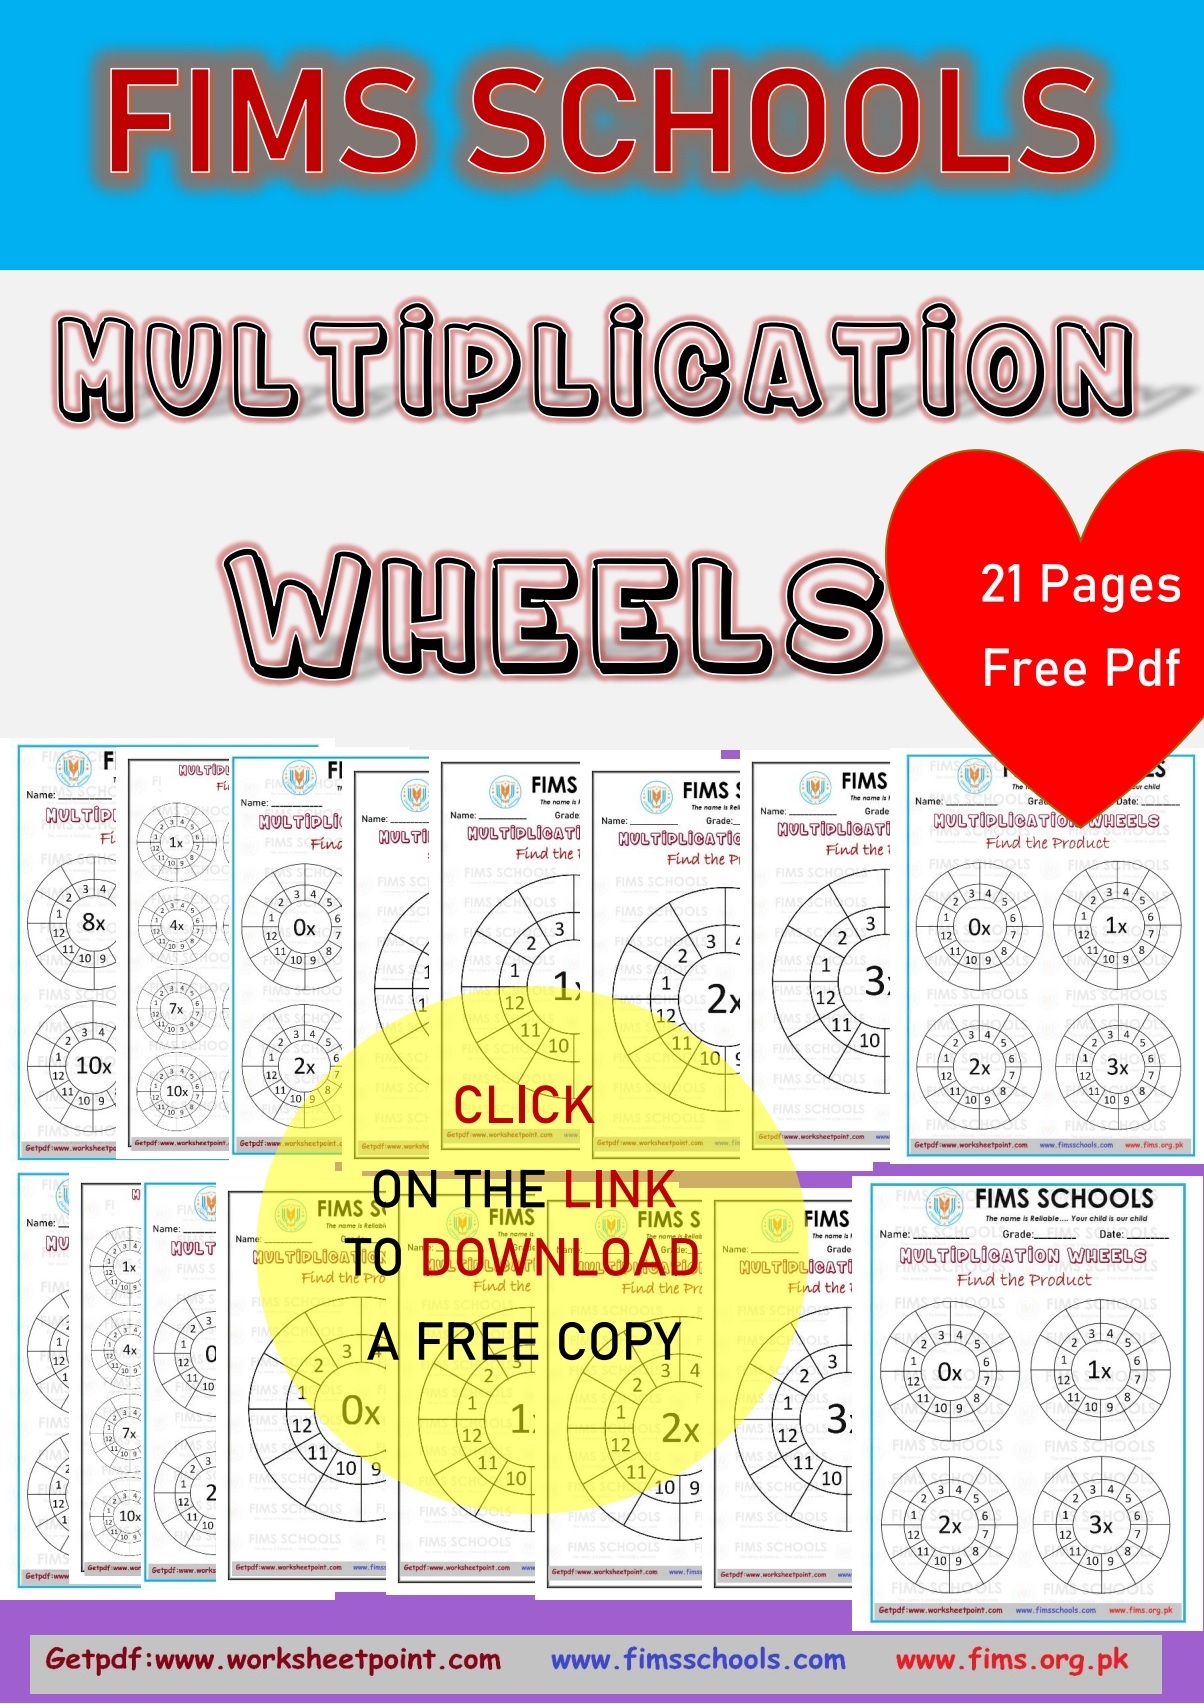 Rich Rusults on Google's SERP when searching for 'Multiplication worksheets,Multiplication Wheels'